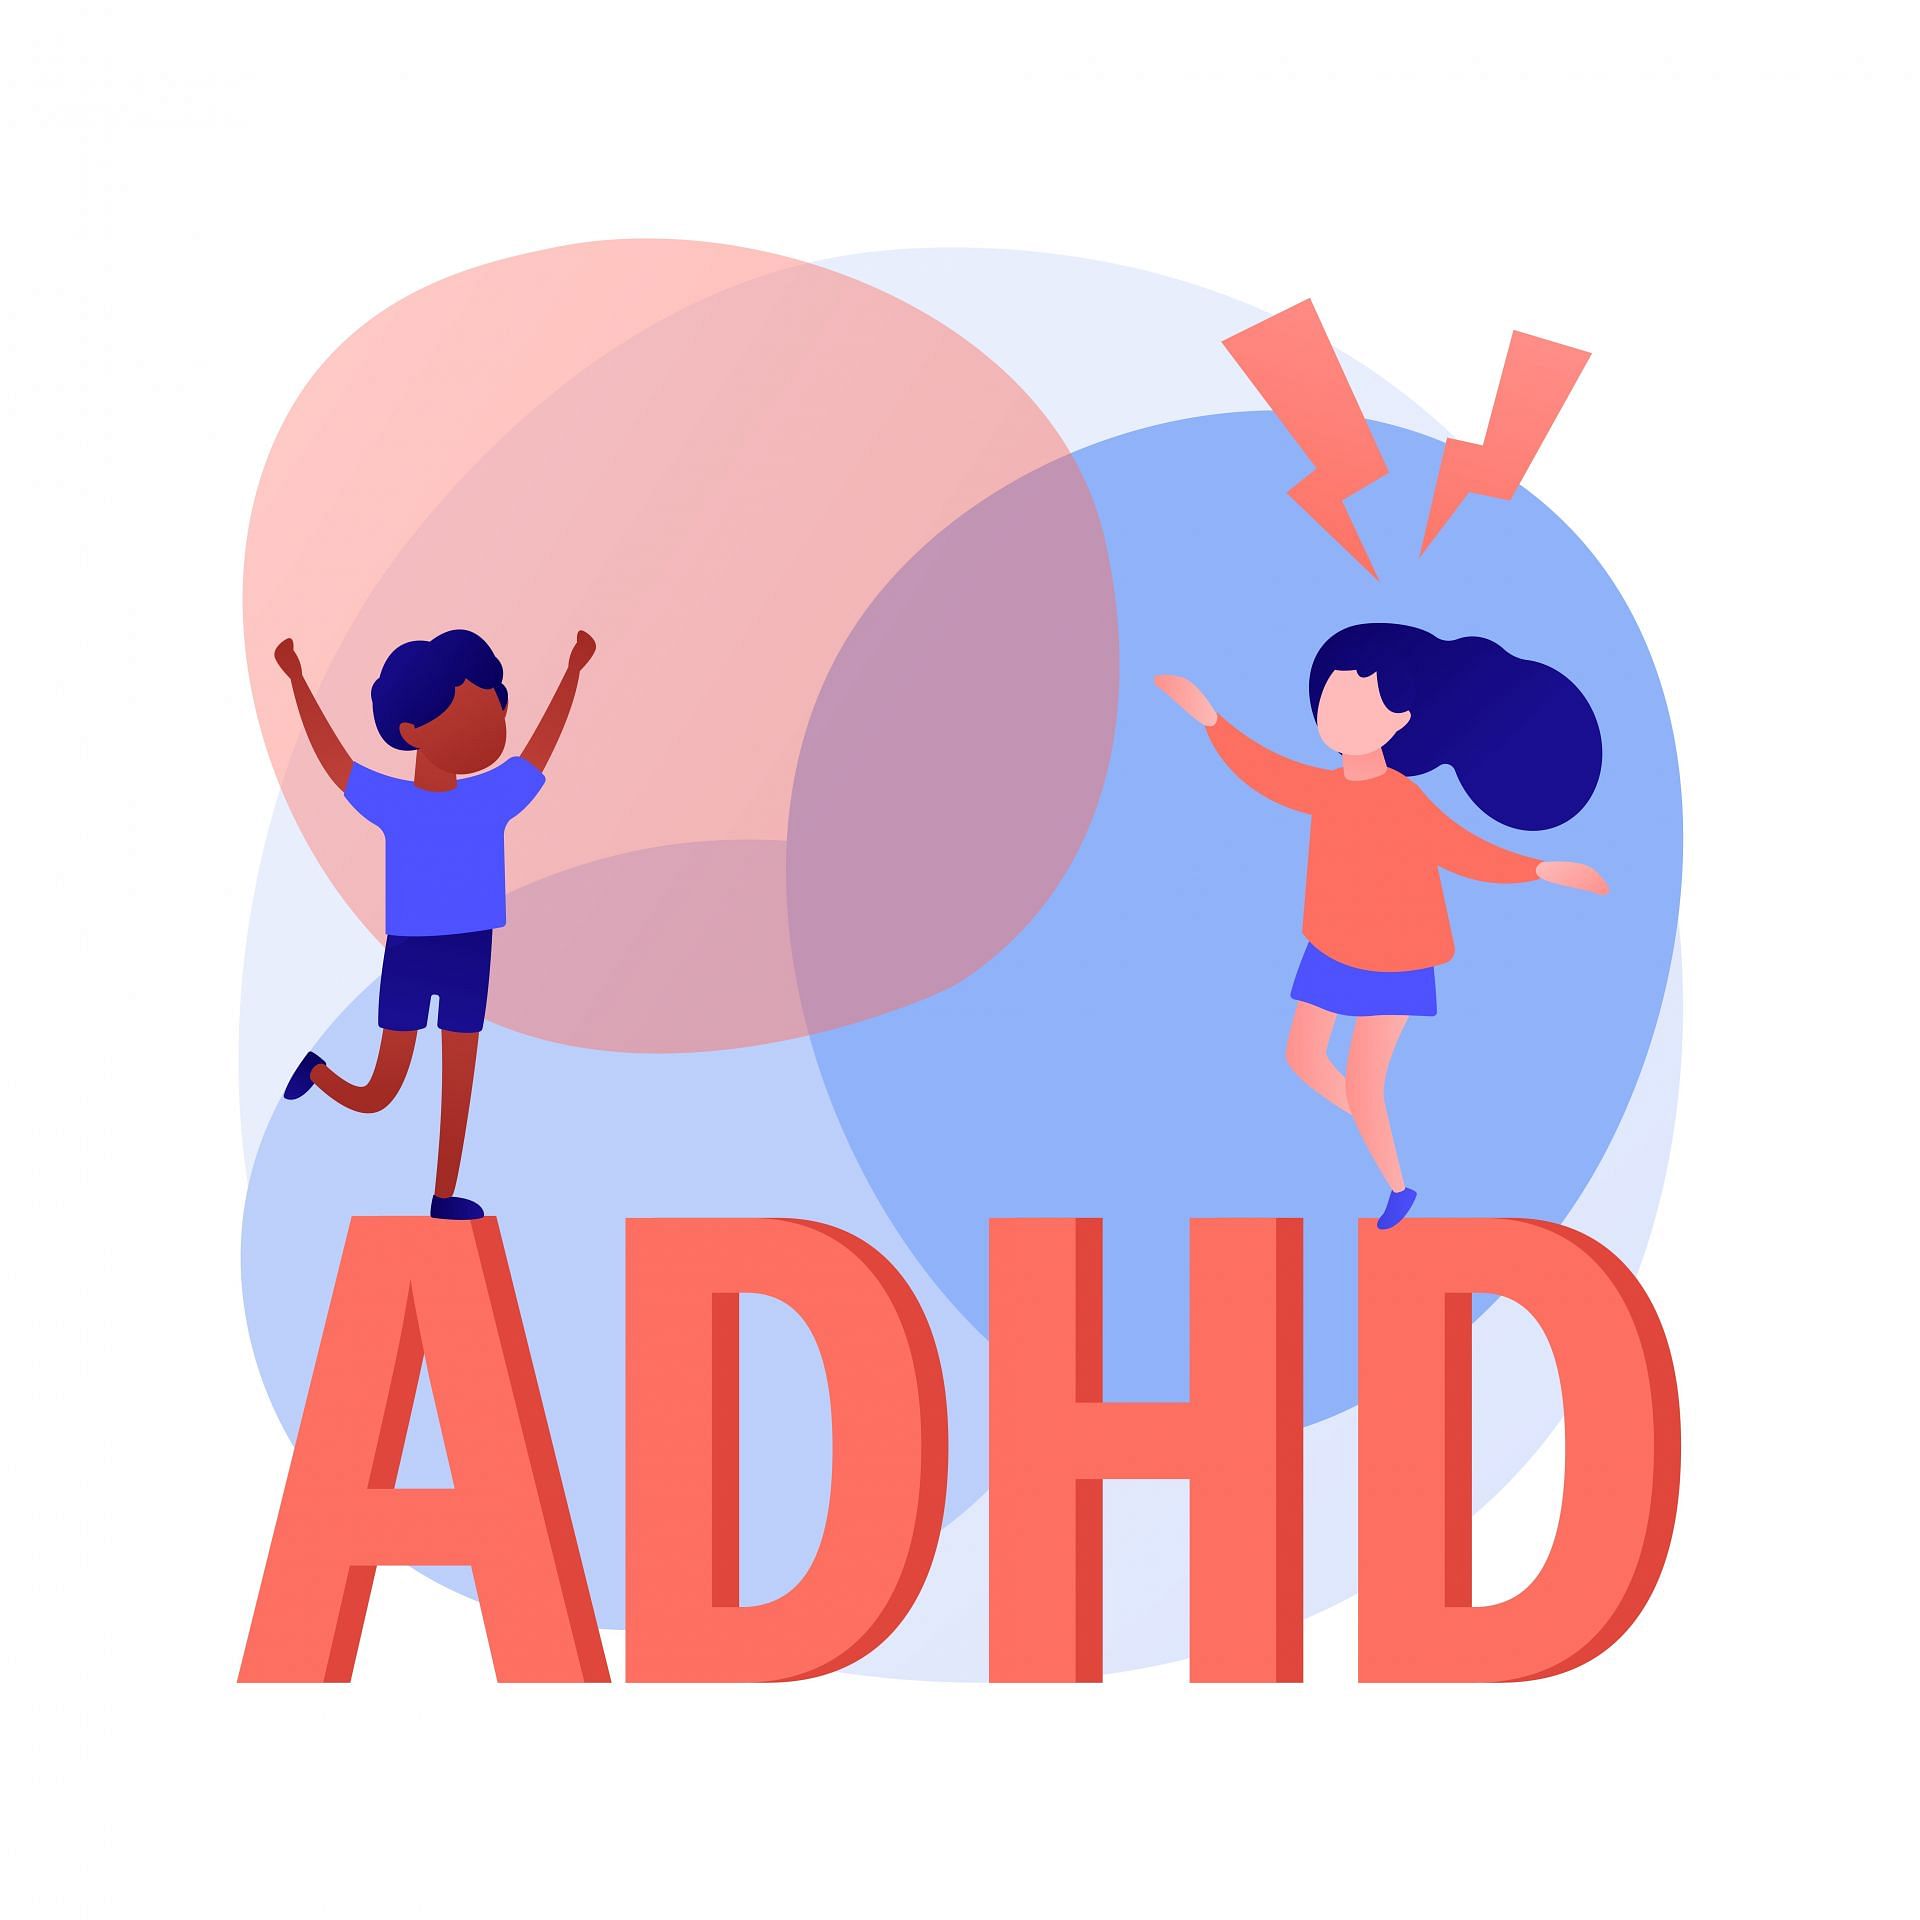 ADHD is a common mental health issue in children. (Image via Freepik)